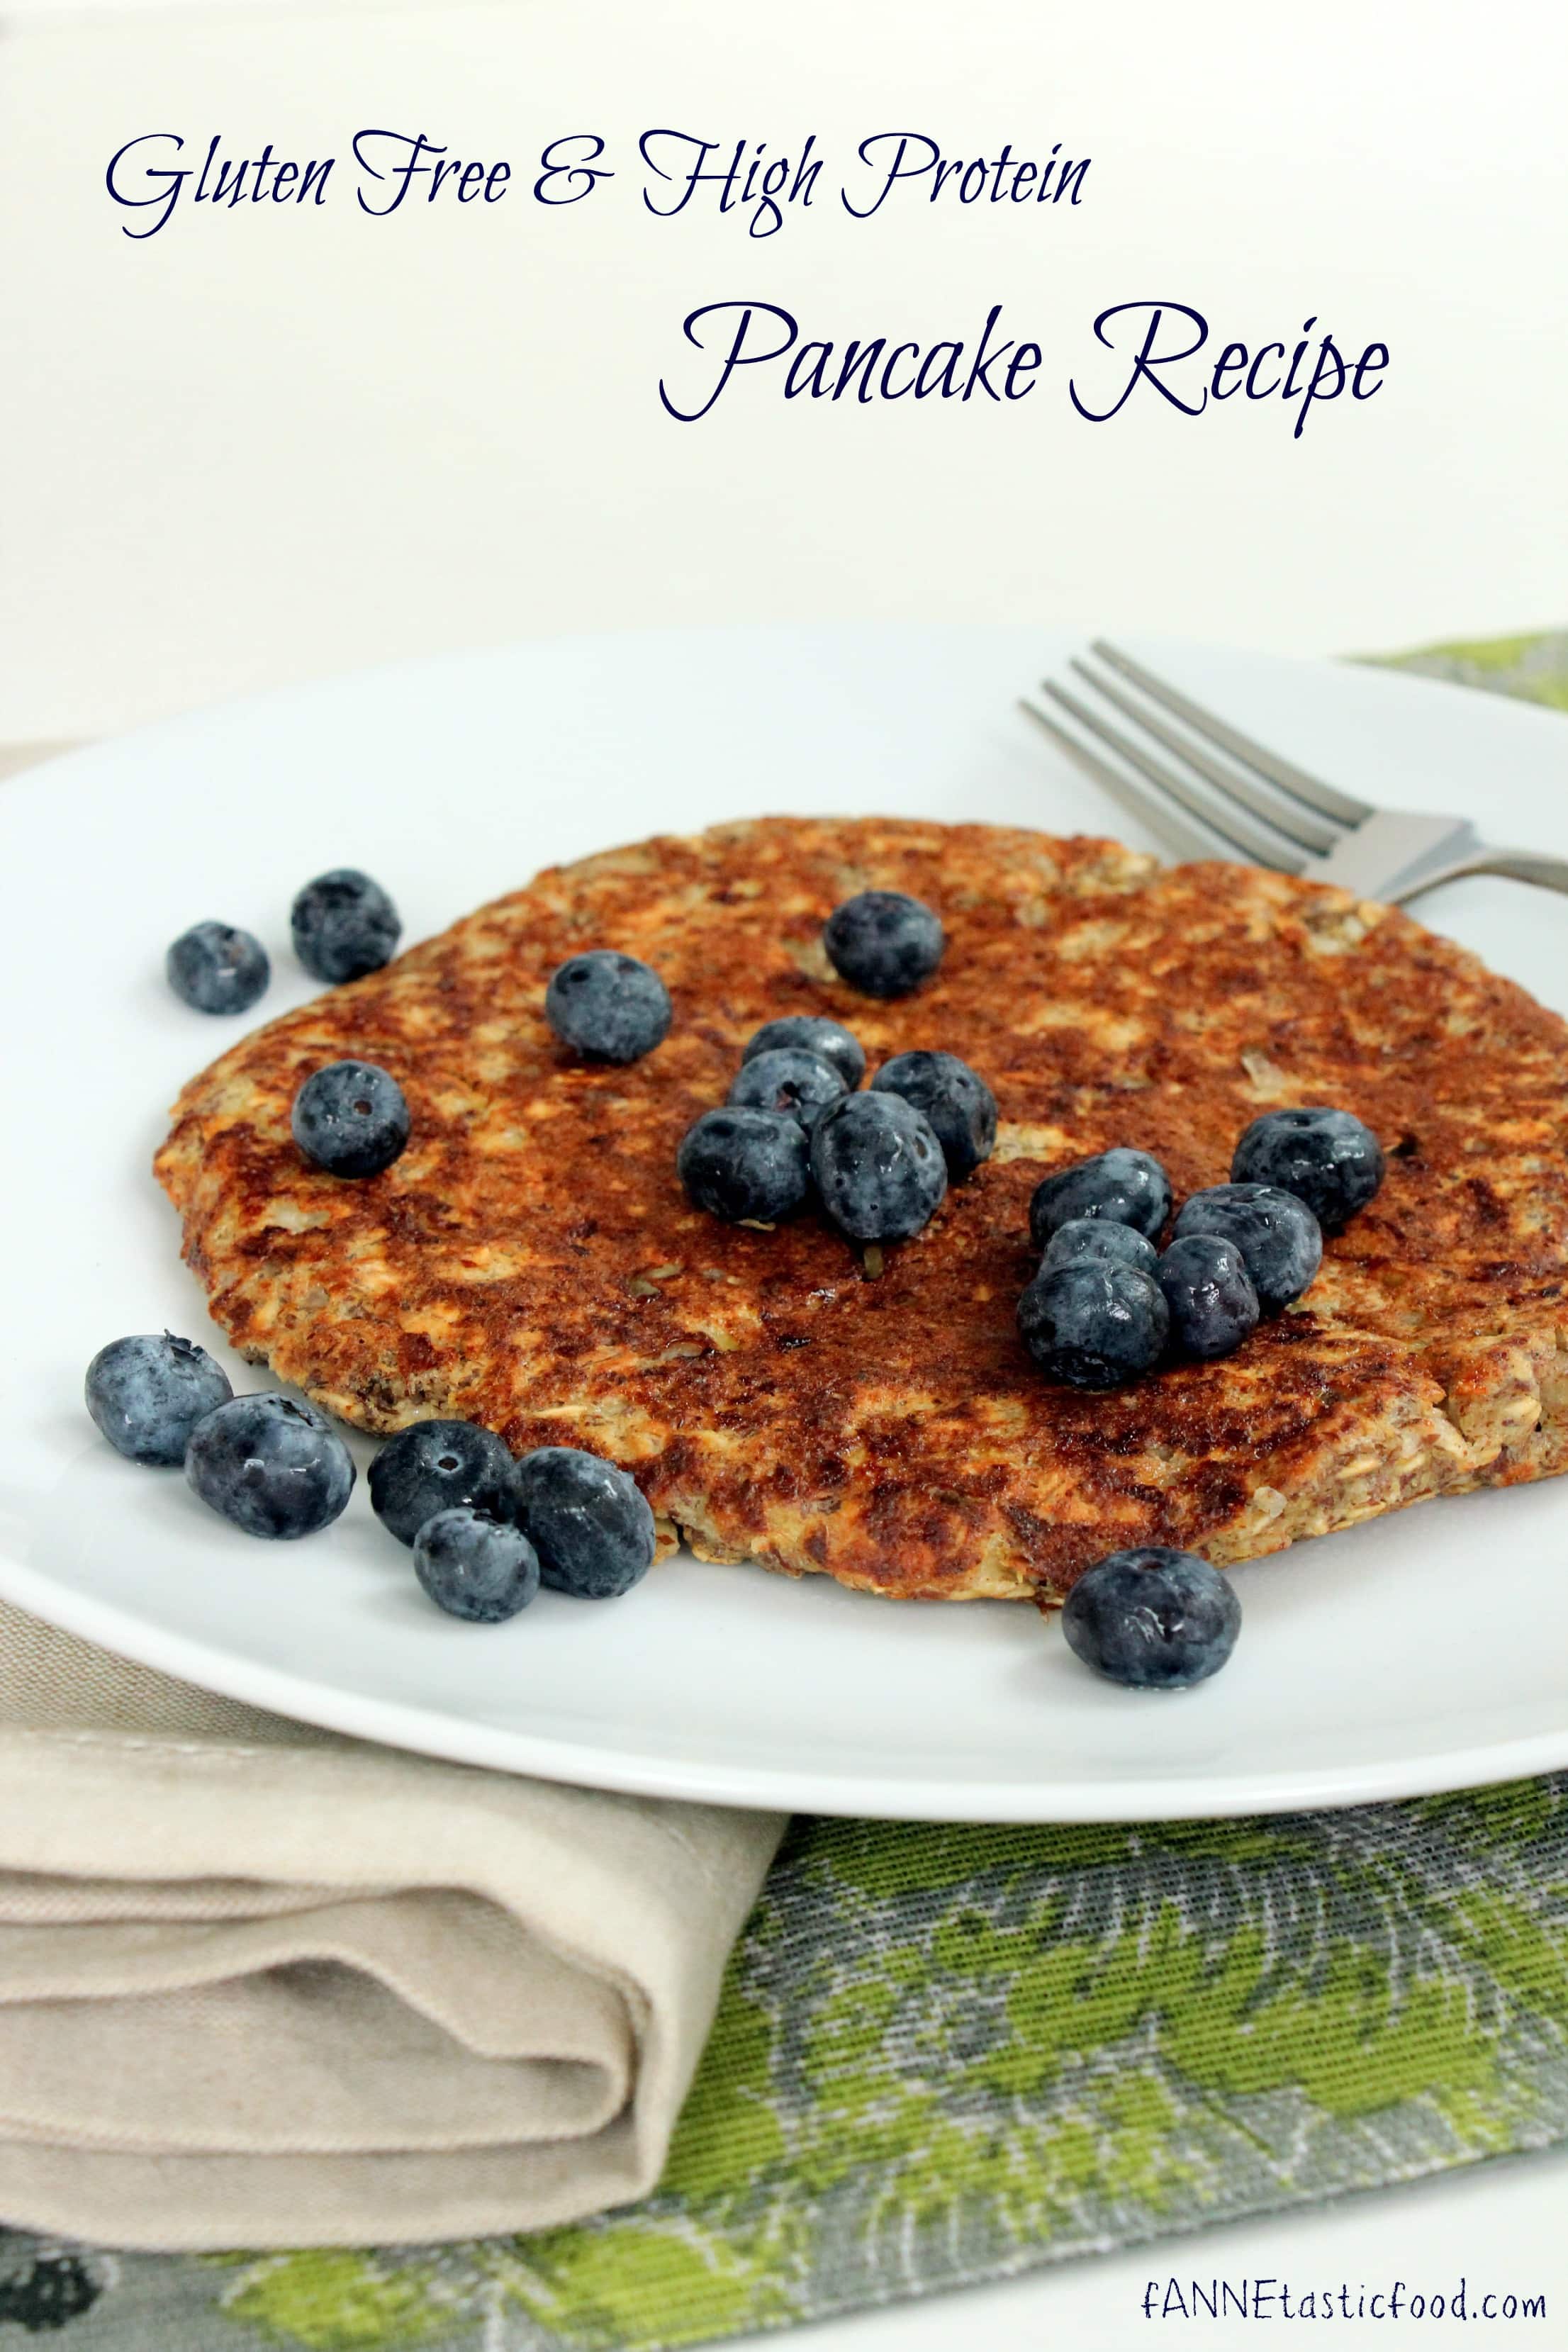 Gluten Free, High Protein Pancake Recipe | Quick and Easy